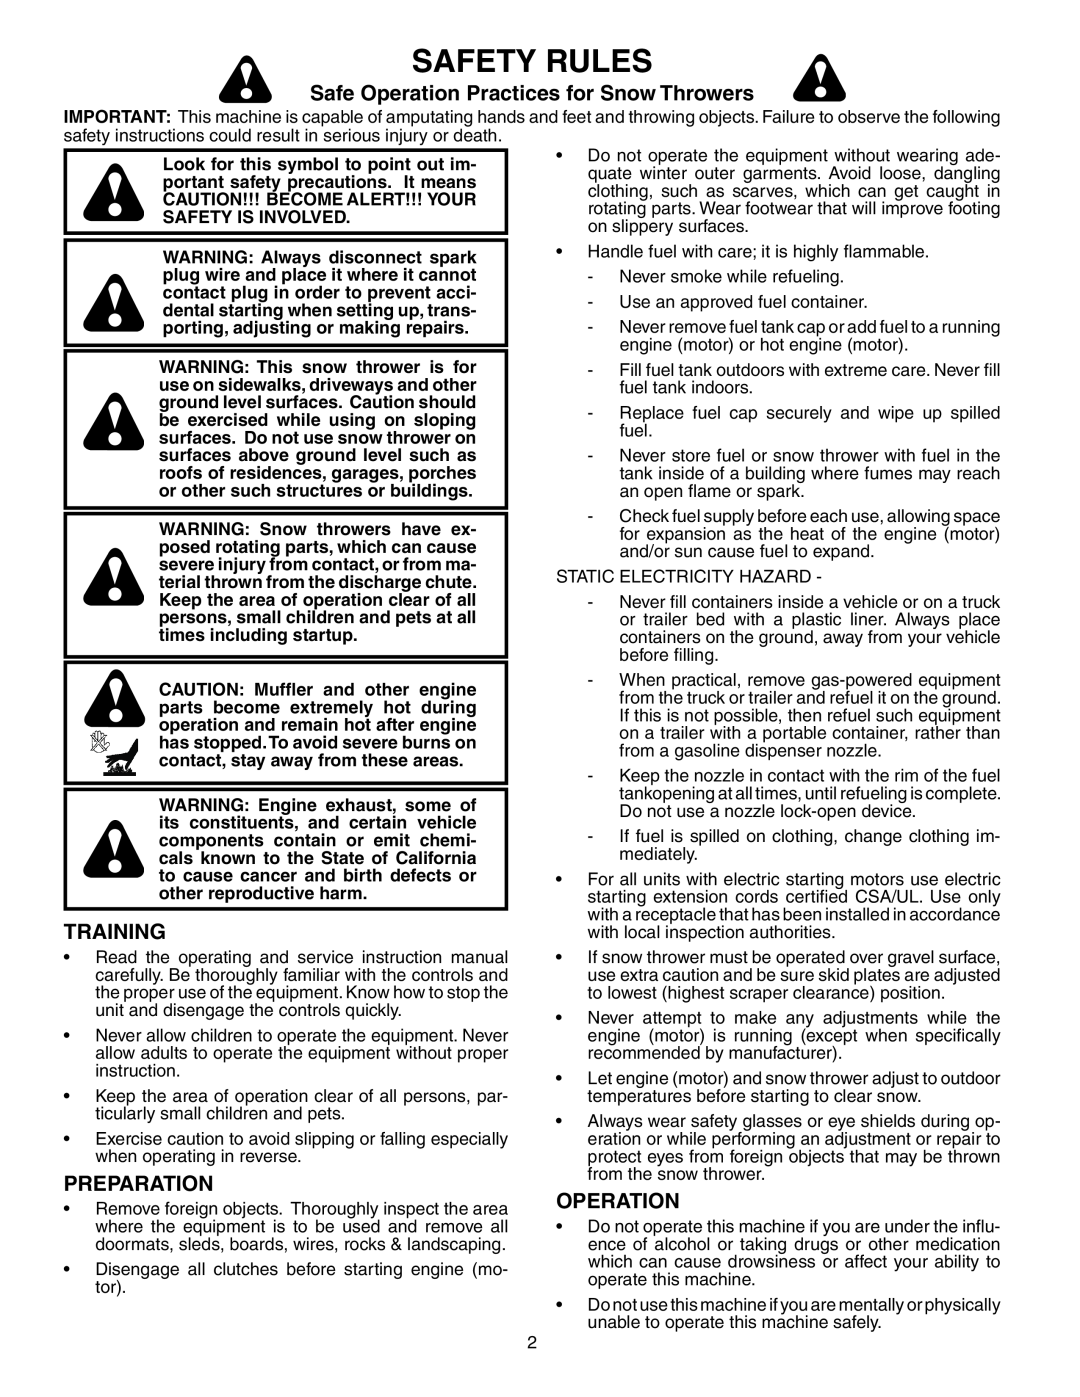 Husqvarna 10527STE owner manual Safety Rules, Safe Operation Practices for Snow Throwers, Training, Preparation 